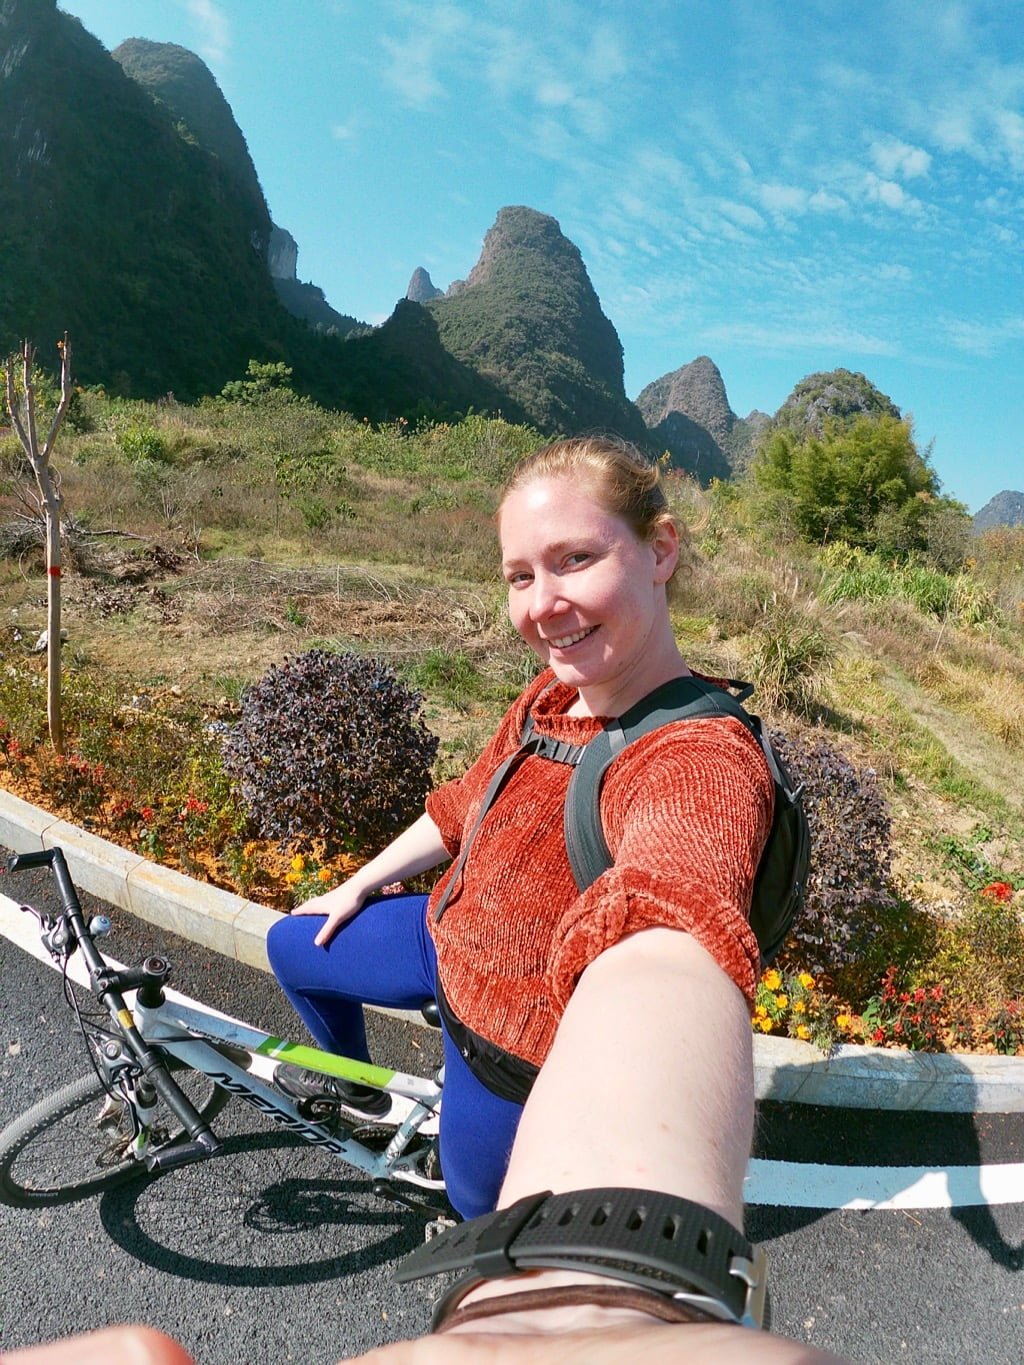 Riding a bike and taking a selfie in the countryside of Yangshuo